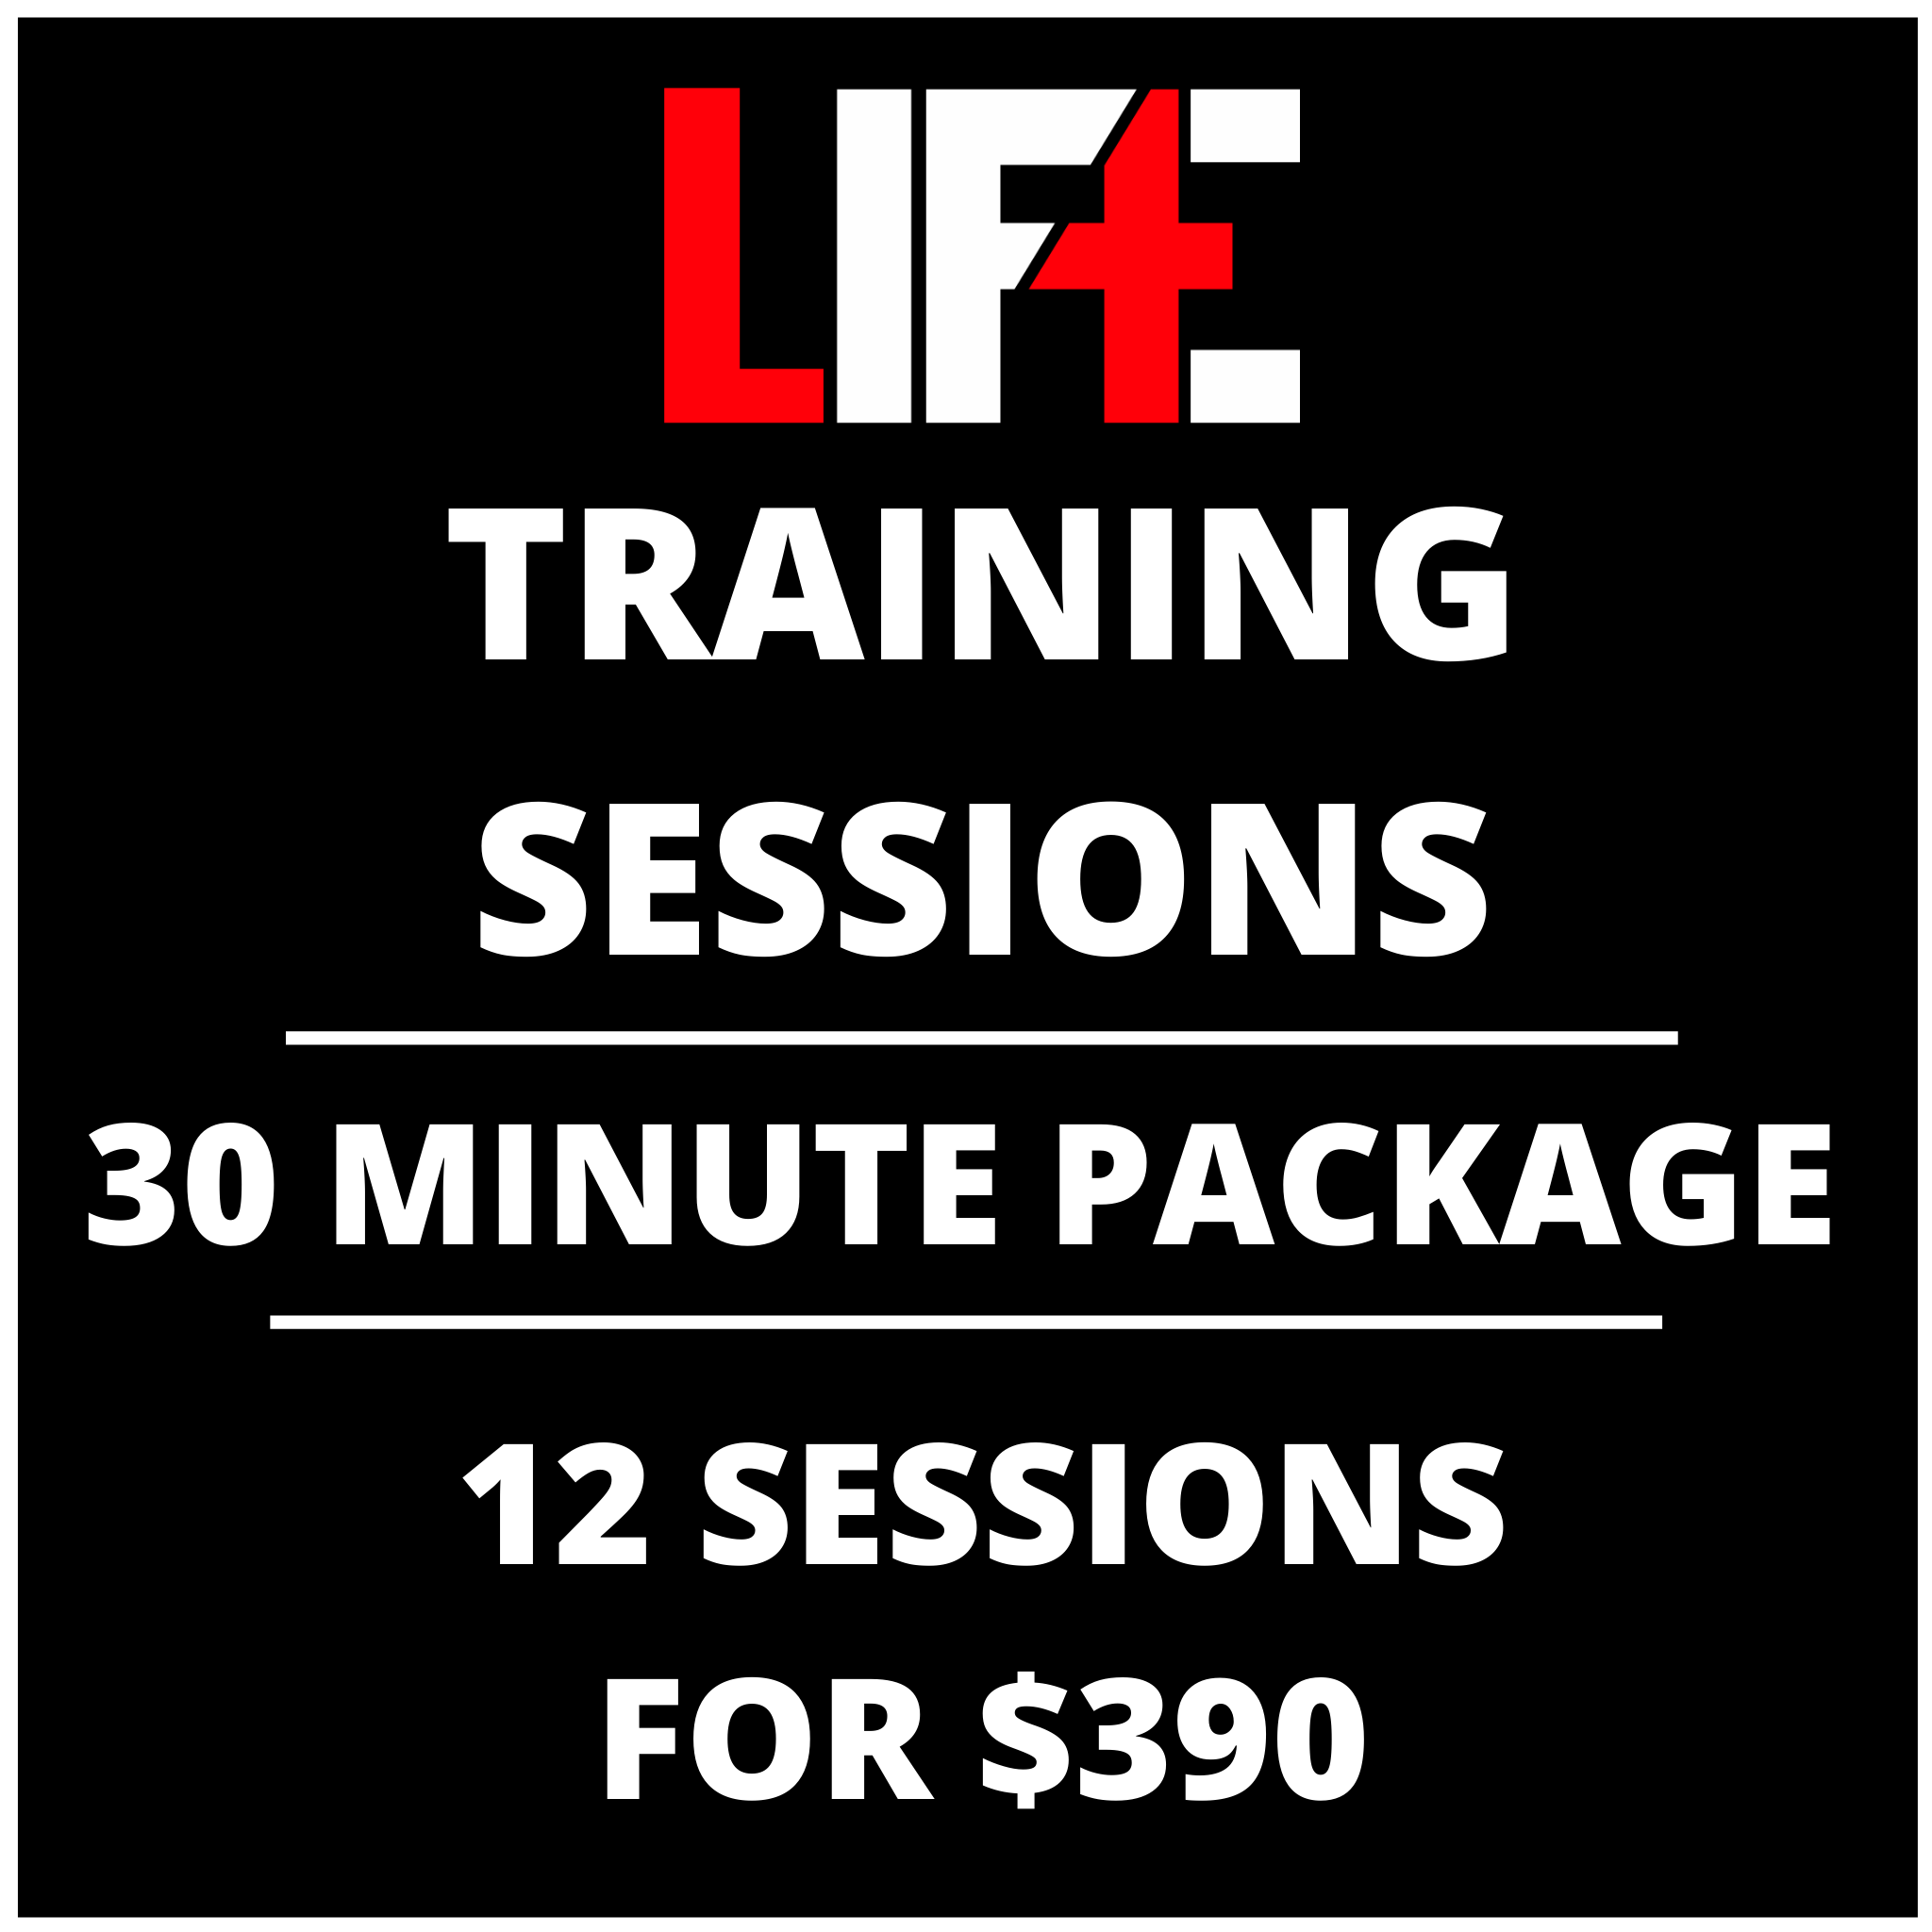 LIFTE Lab Training Sessions (12 x 30 Minutes)